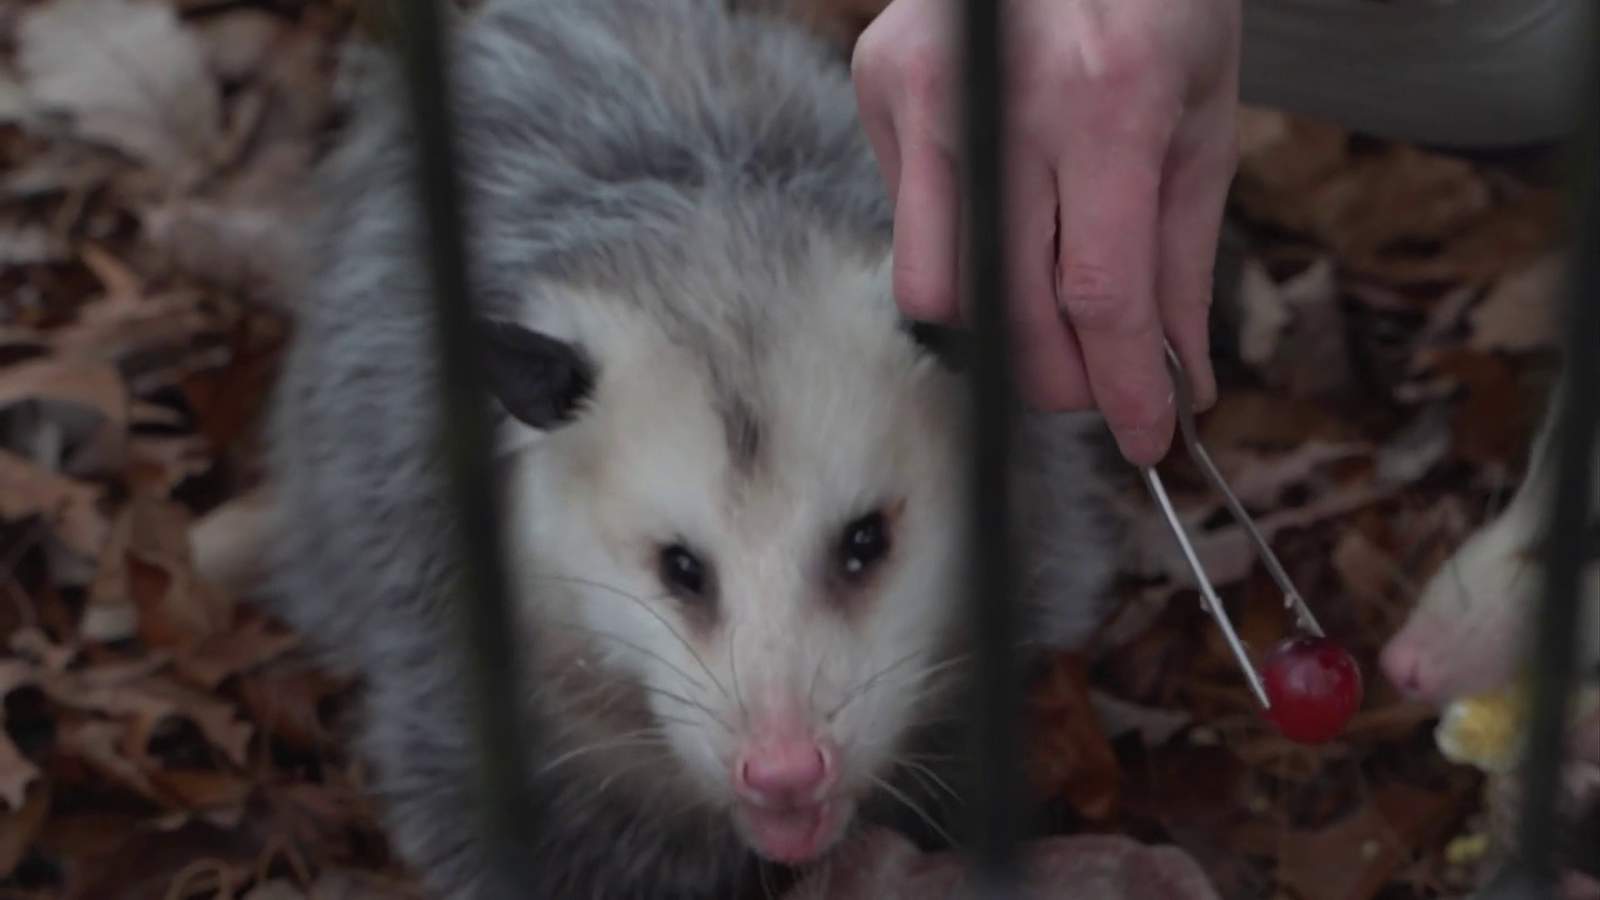 Just how much do you know about opossums? Let Gus and Jack teach you!